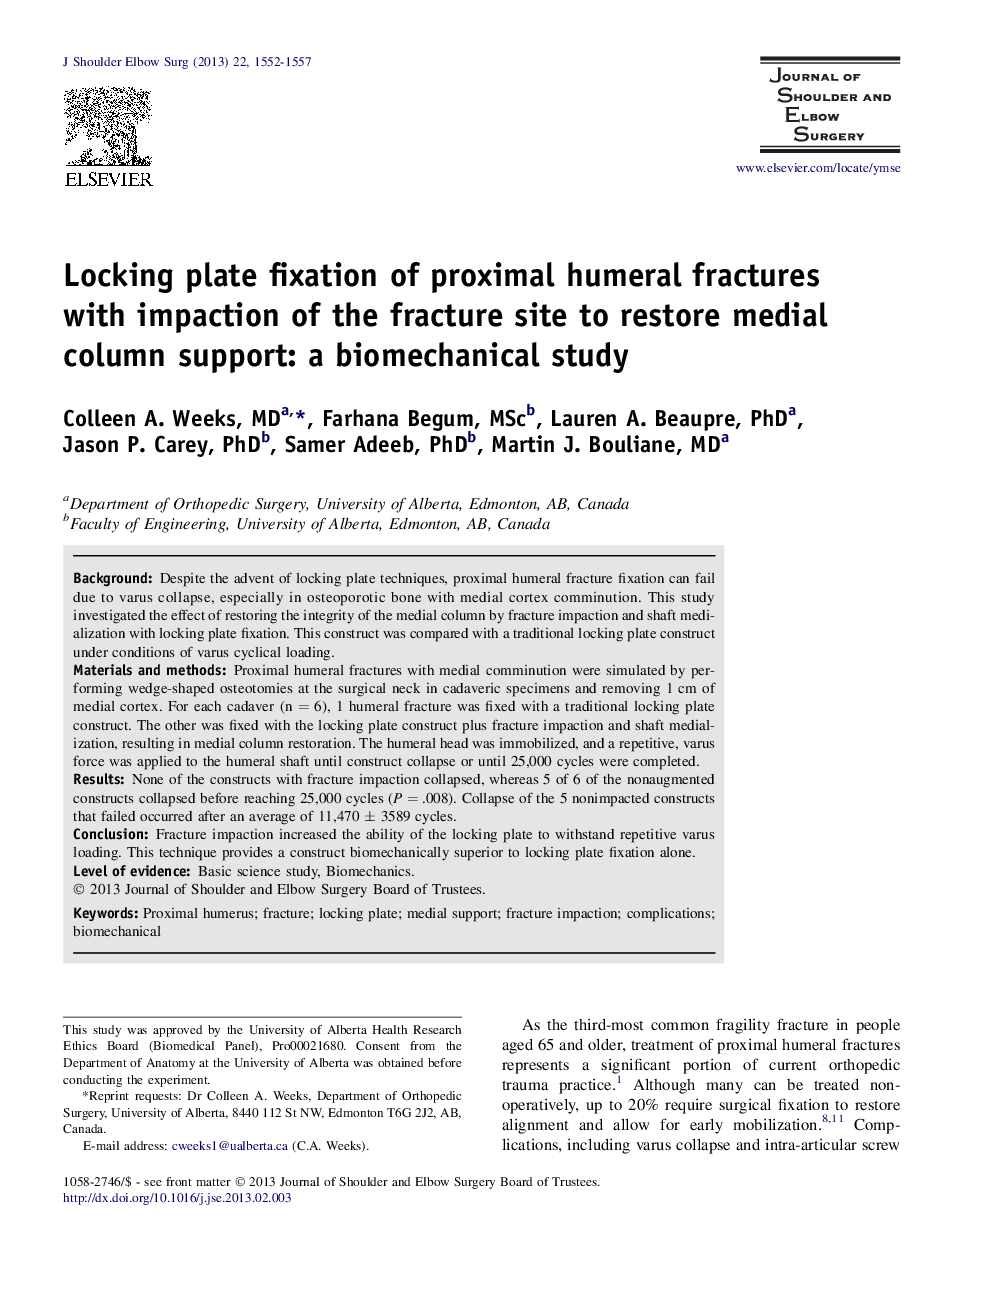 Locking plate fixation of proximal humeral fractures with impaction of the fracture site to restore medial column support: a biomechanical study 